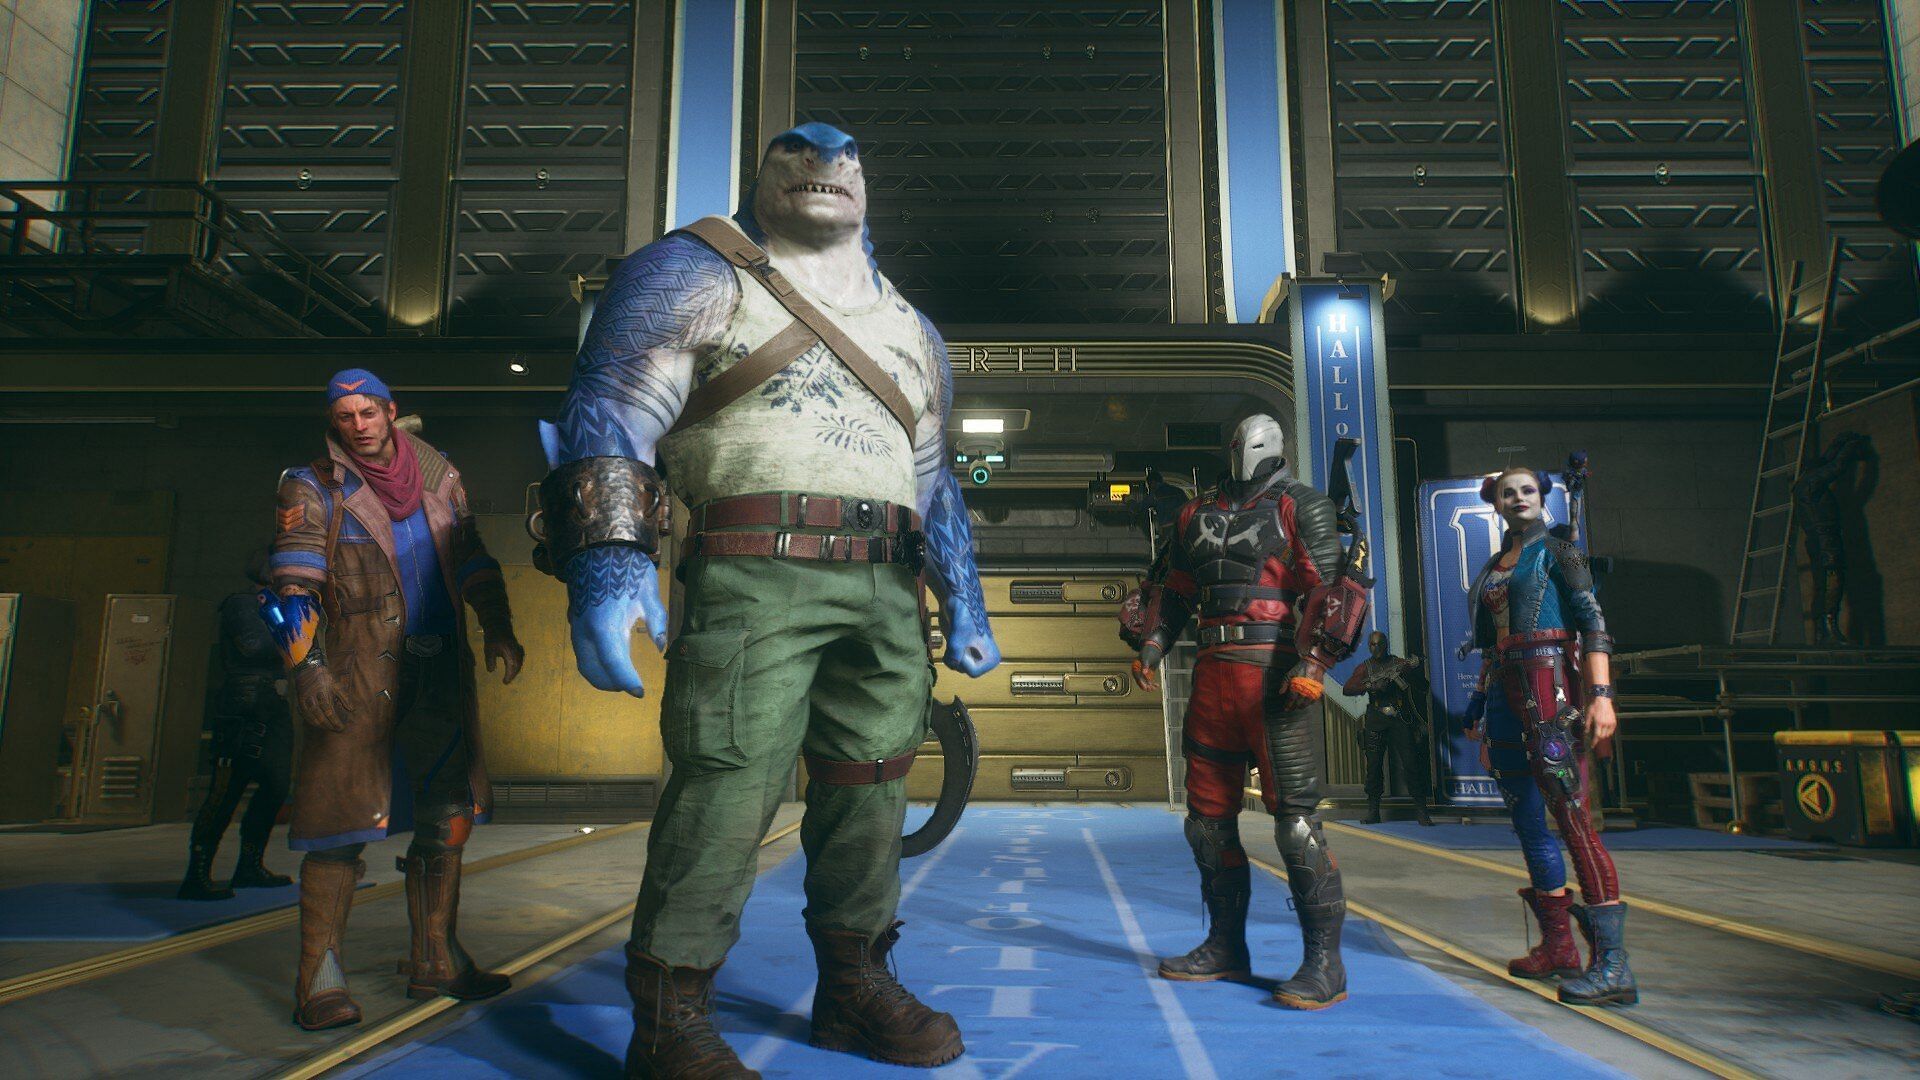 Task Force X, four convicts fighting to save the world (Image via Warner Bros. Games)